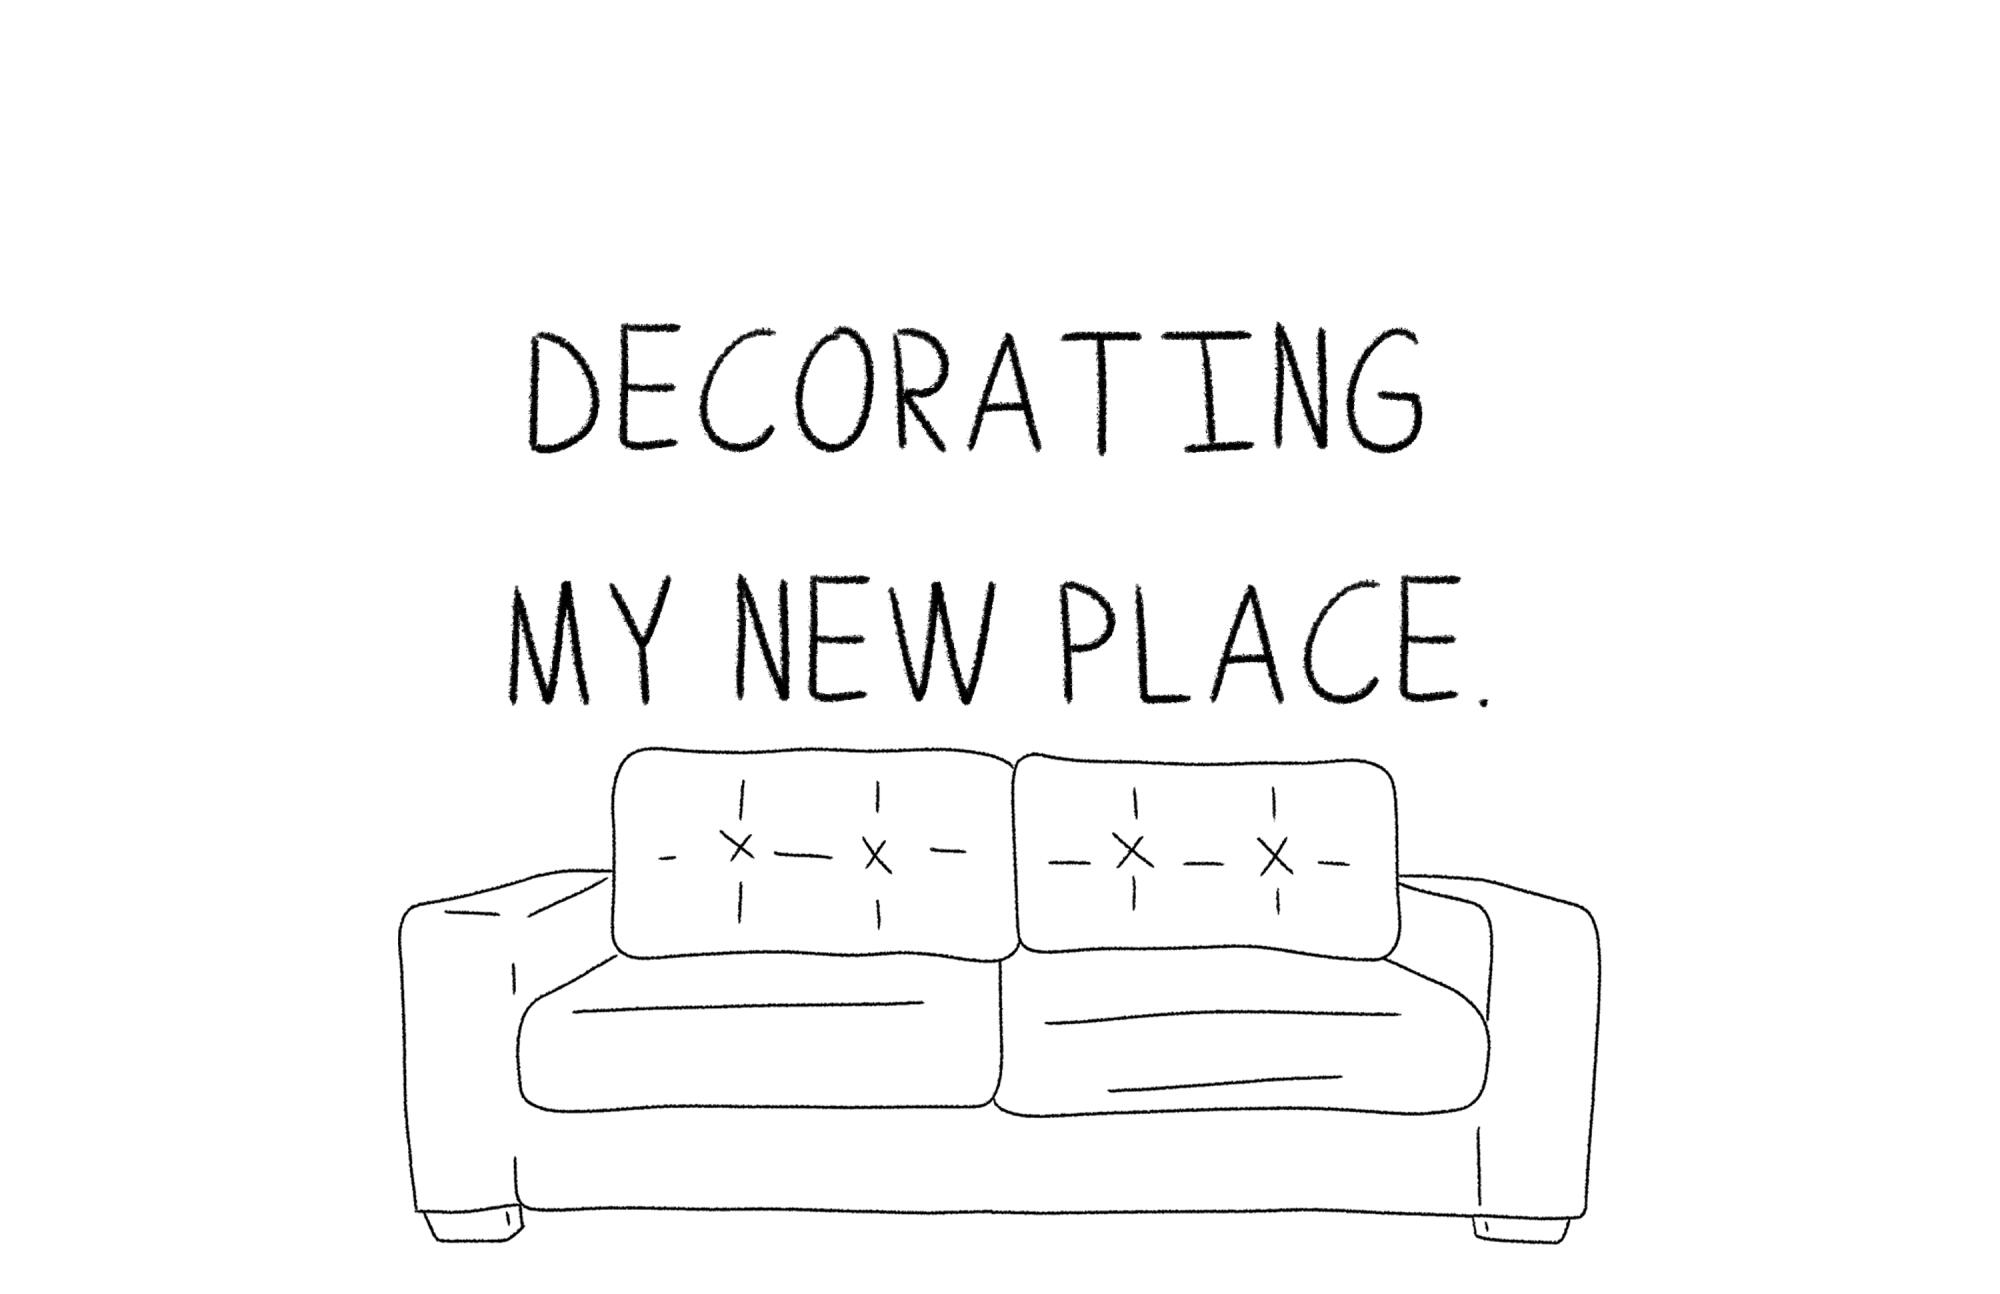 text: 'decorating my new place' illustration of a couch